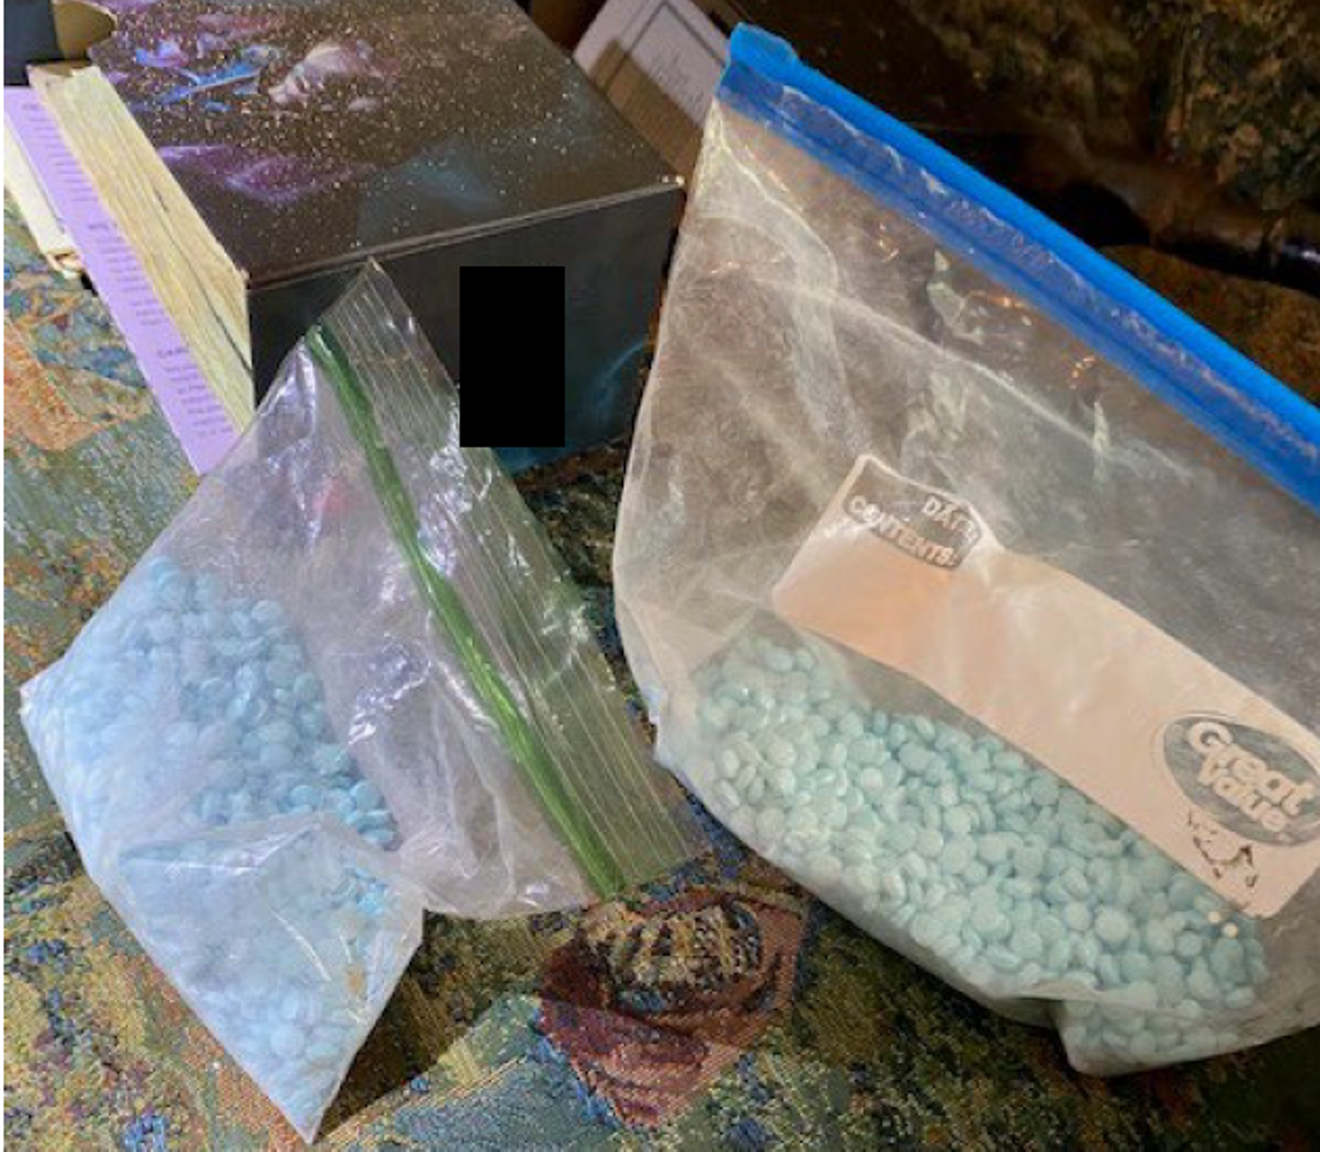 Illegally produced pills laced with fentanyl are responsible for many overdoses in North Texas